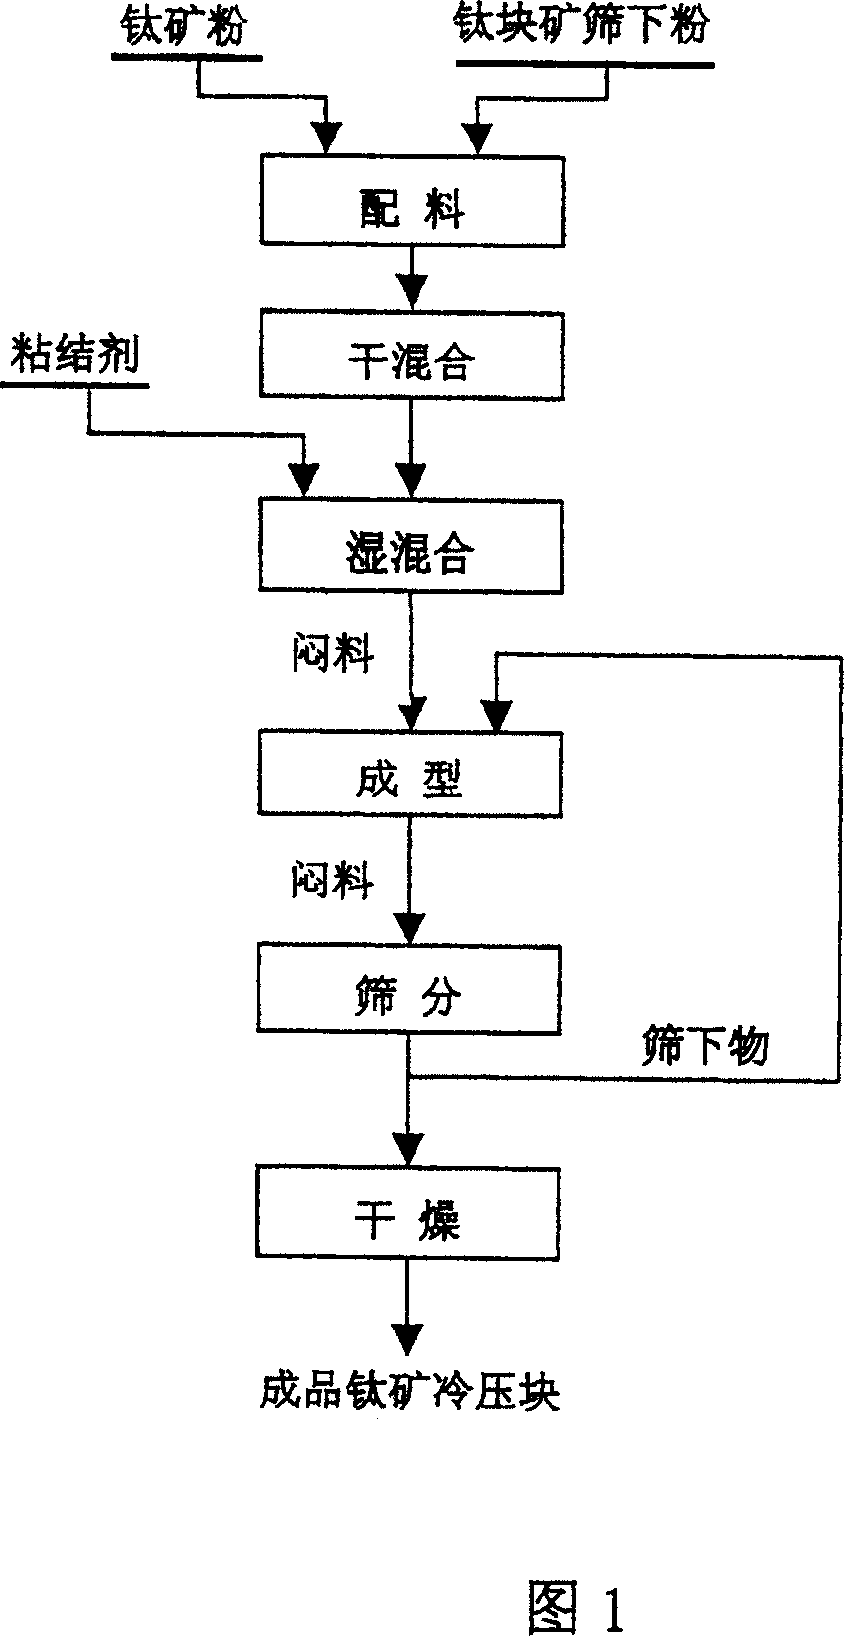 Titanium ore cold briquetting for protecting blast furnace and its production method